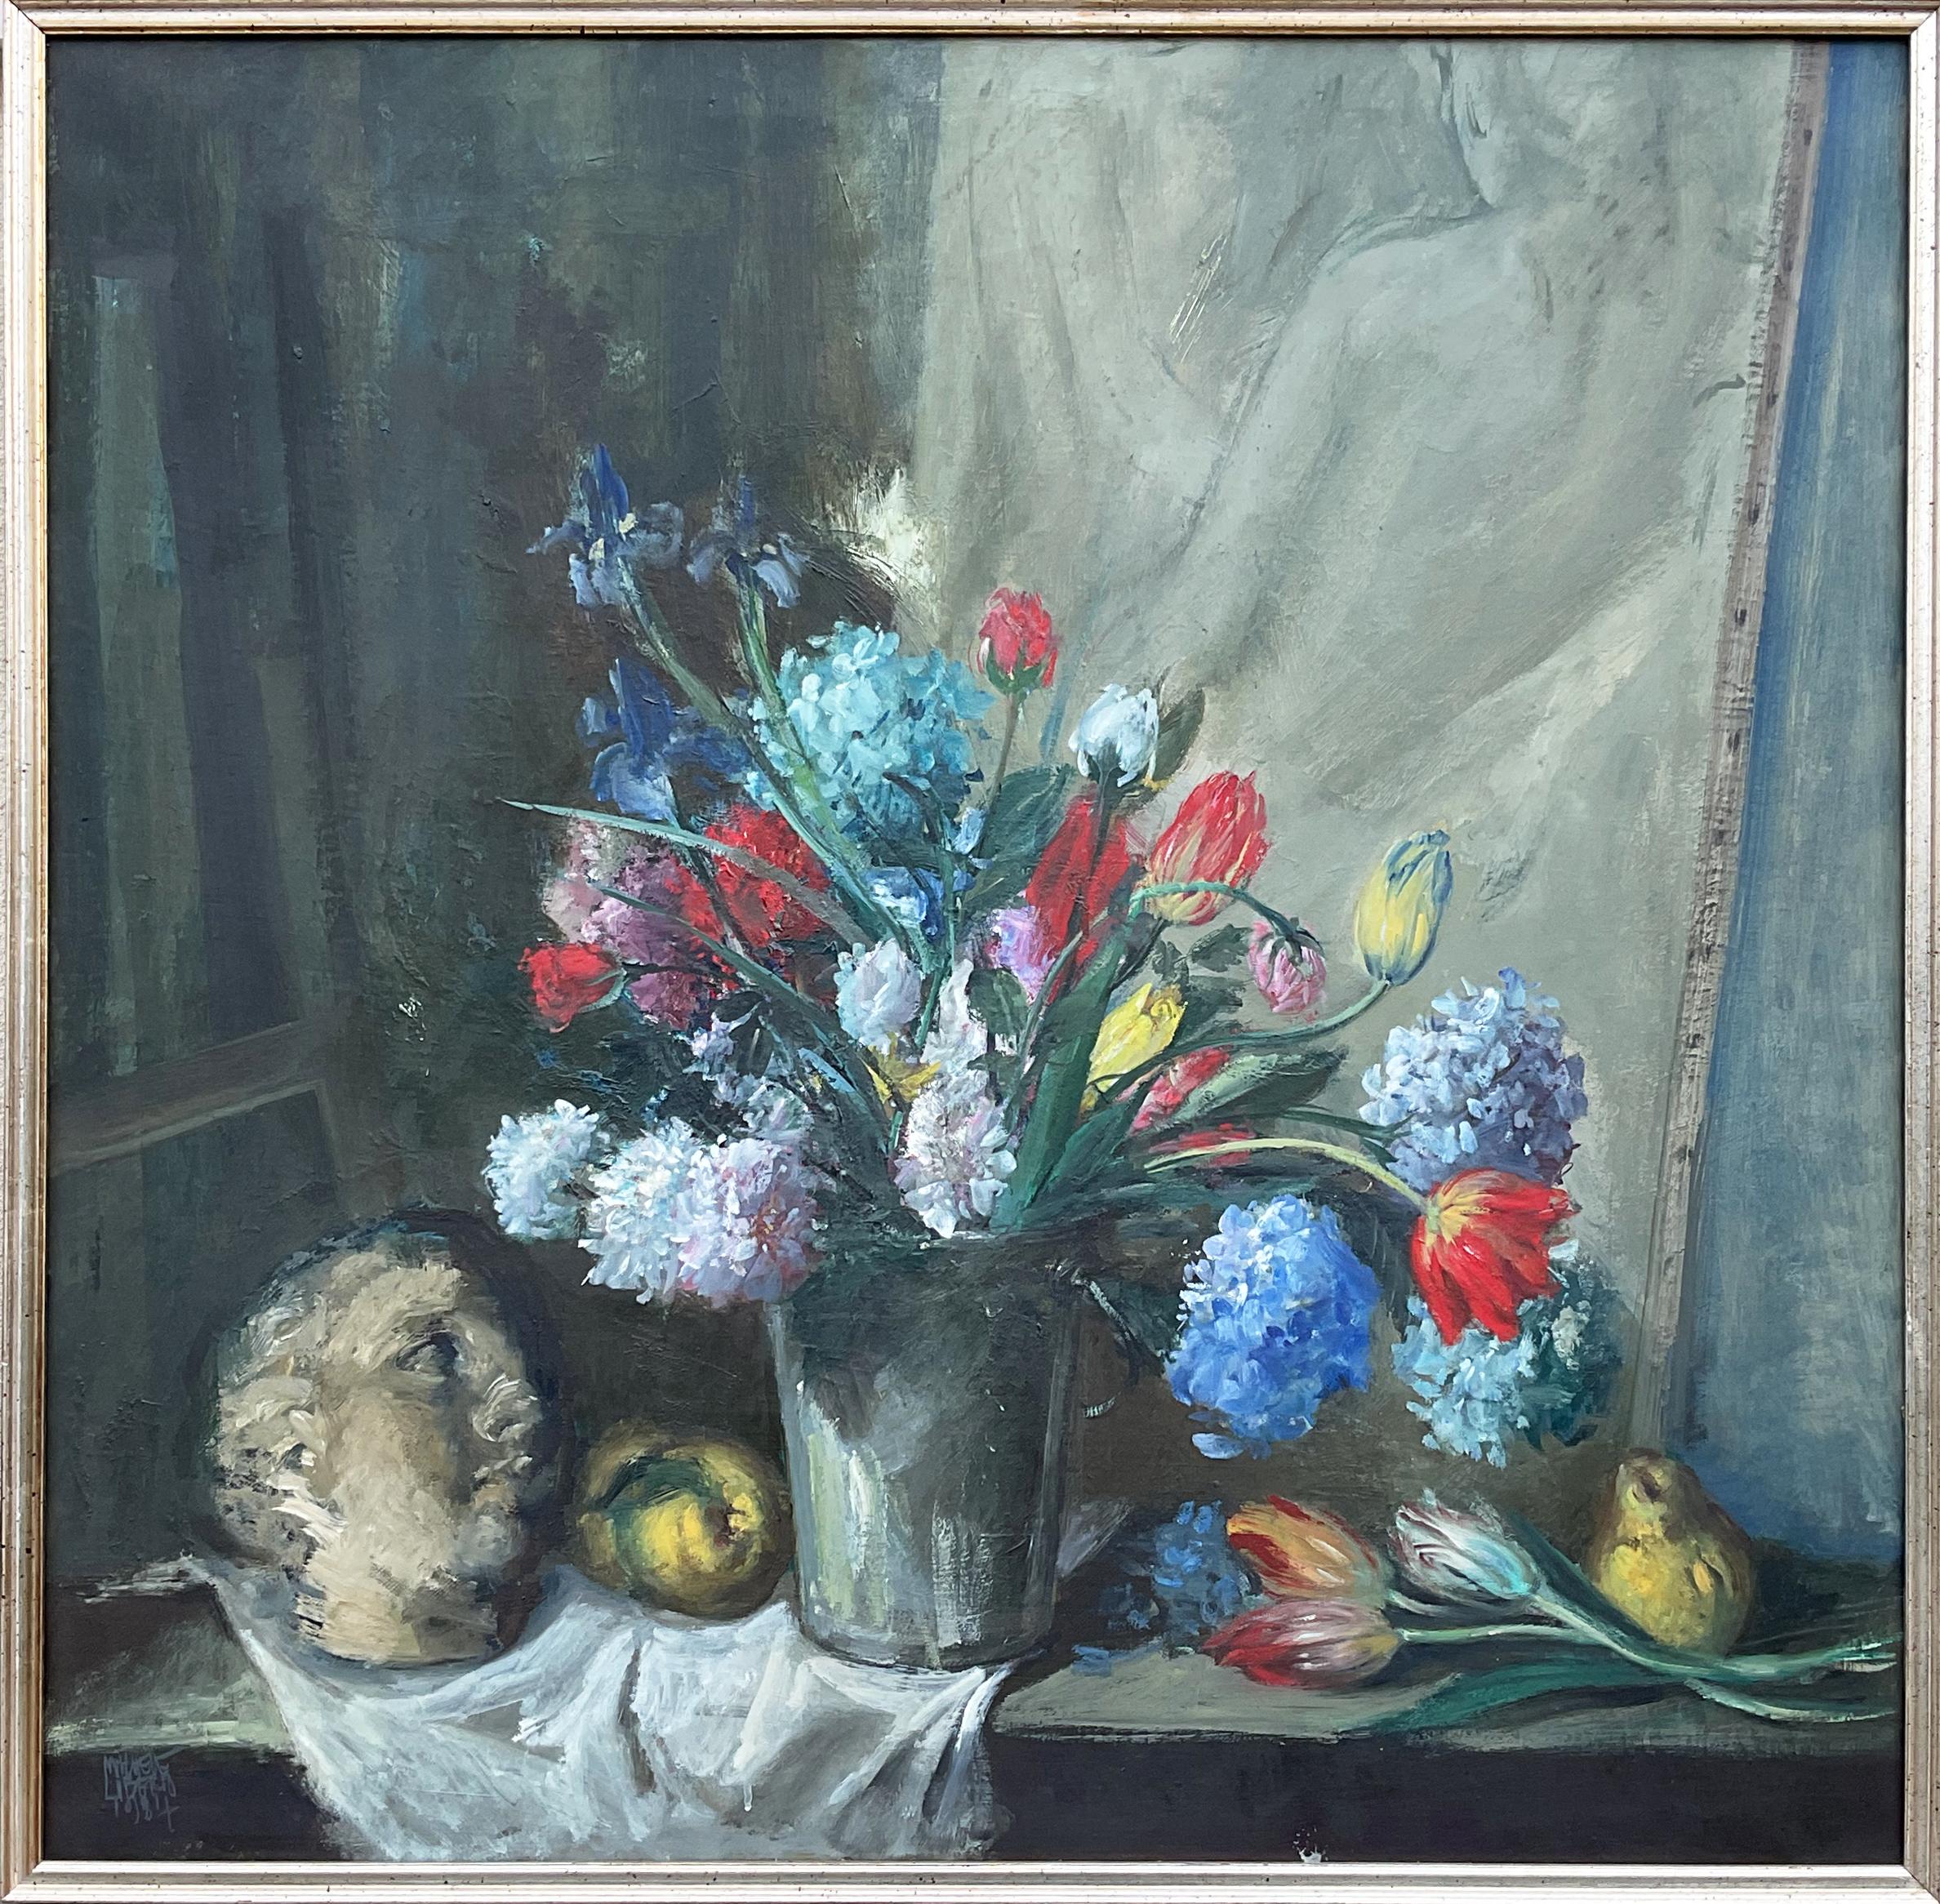 Michele Loberto
1922 - ?
Still life of flowers with classical head, 1984
oil on canvas, cm. 95x95
Signature and date at lower left: Michele Loberto 1984

The painting, in excellent condition from an important private collection in Trieste, depicts a